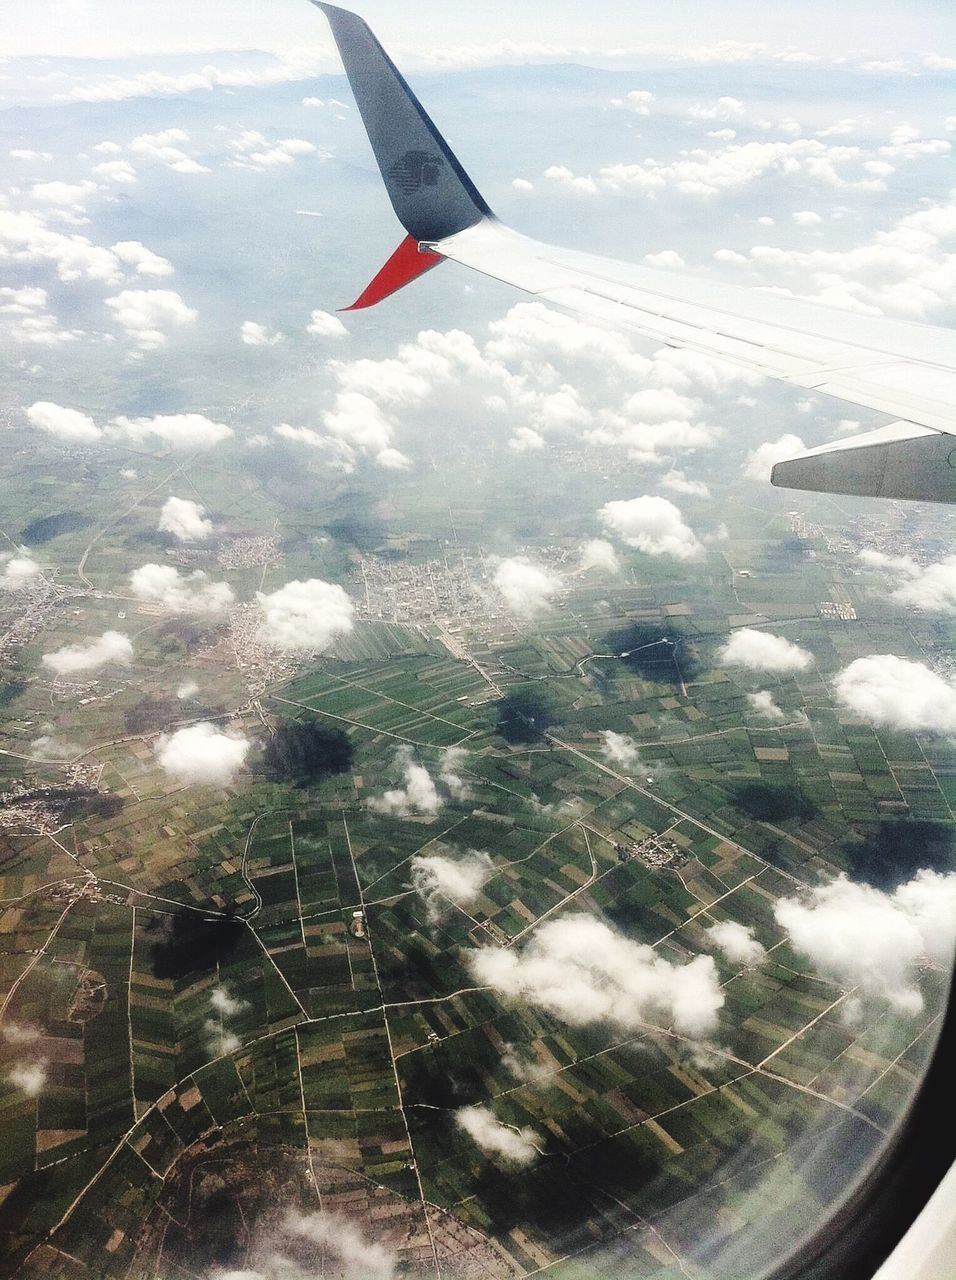 AERIAL VIEW OF AIRPLANE WING OVER LANDSCAPE